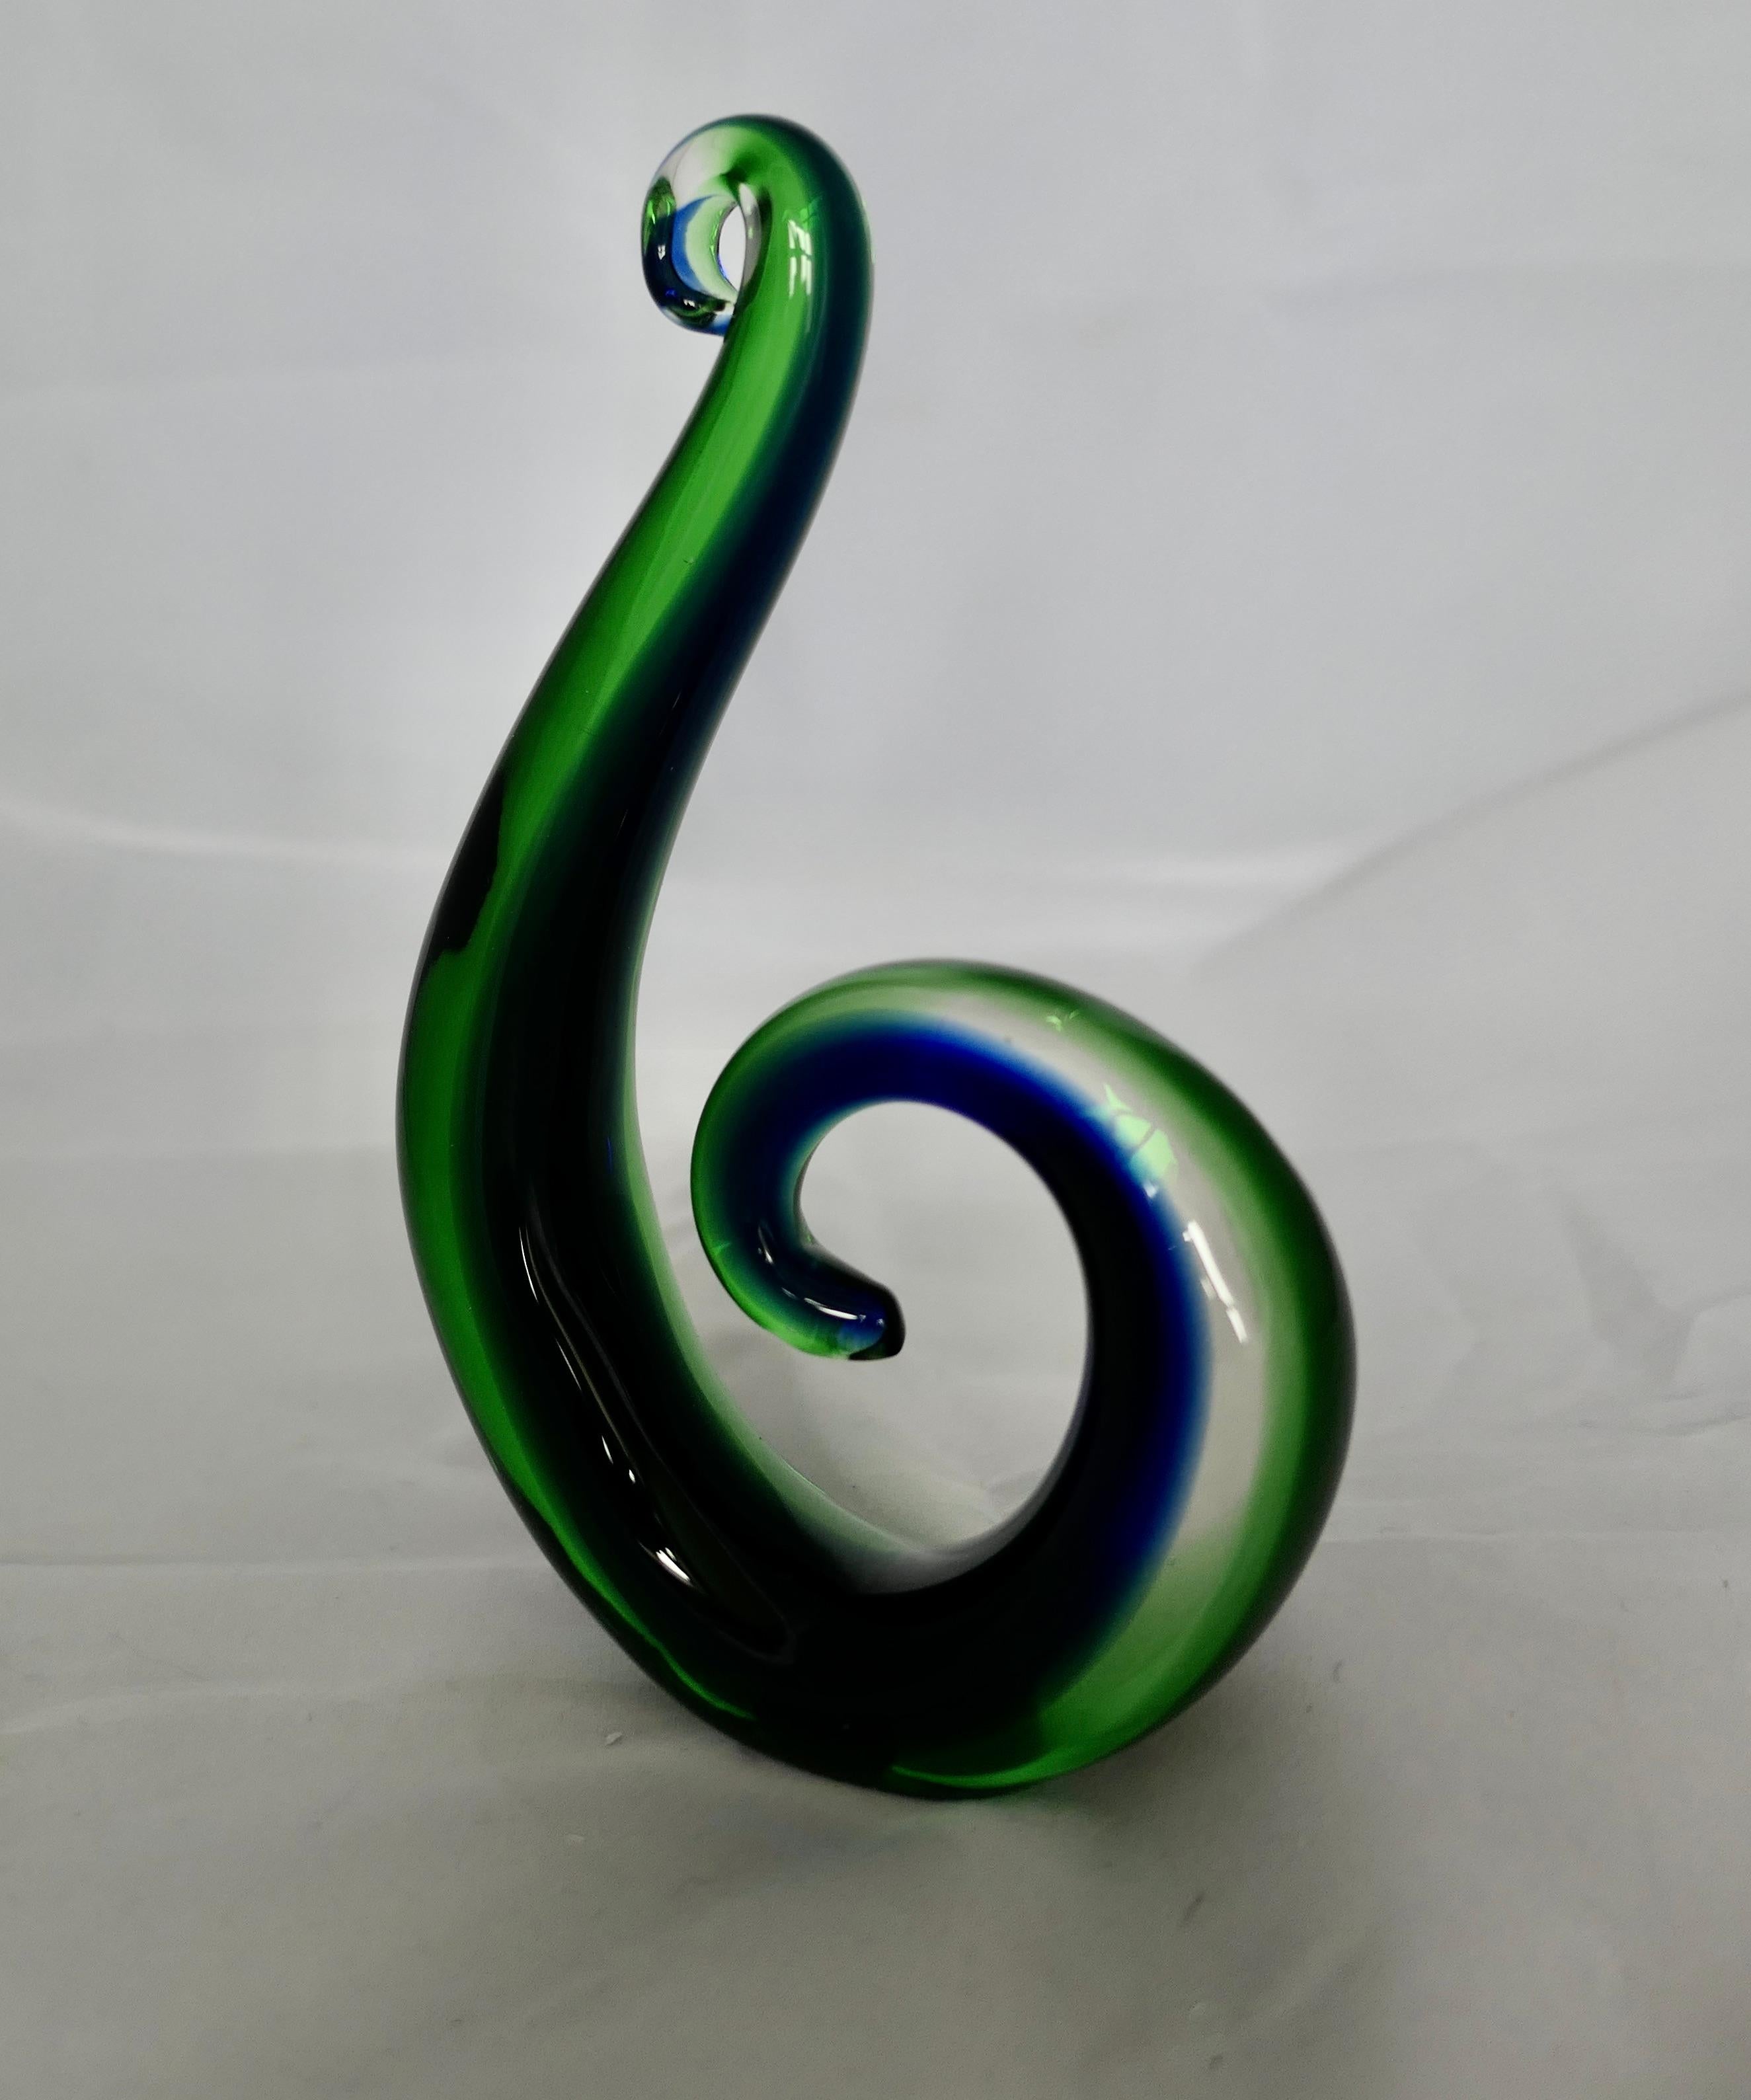 Mid-20th Century Vintage Murano Hand Crafted Green and Blue Koru  Representing a Fern Frond   For Sale